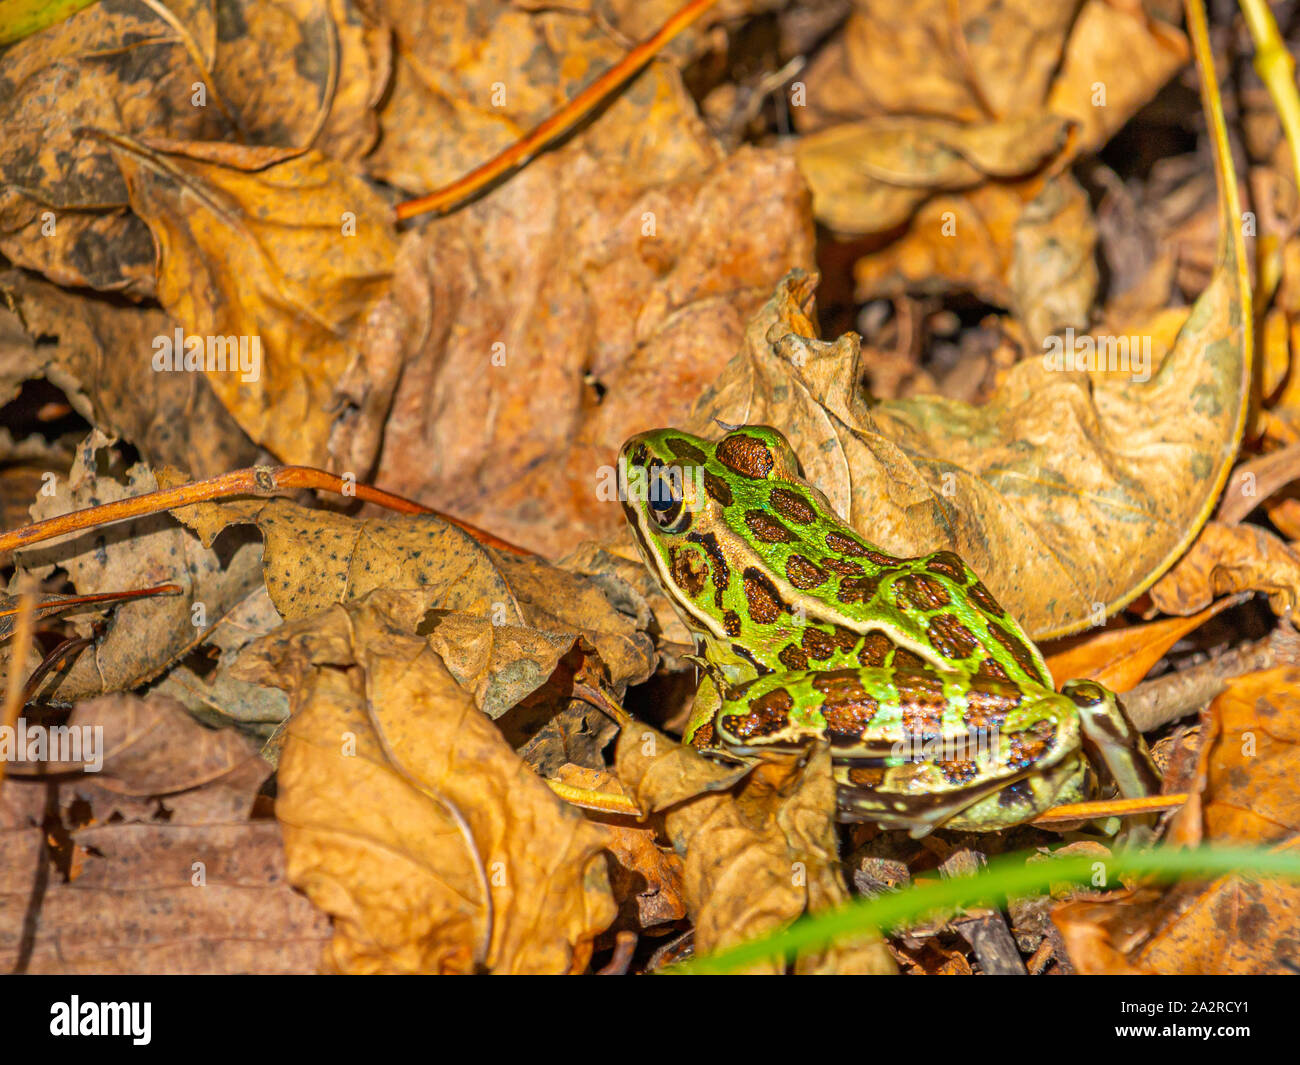 In the forest near a river, a green spotted northern leopard frog sits among autumn's fallen leaves. Stock Photo